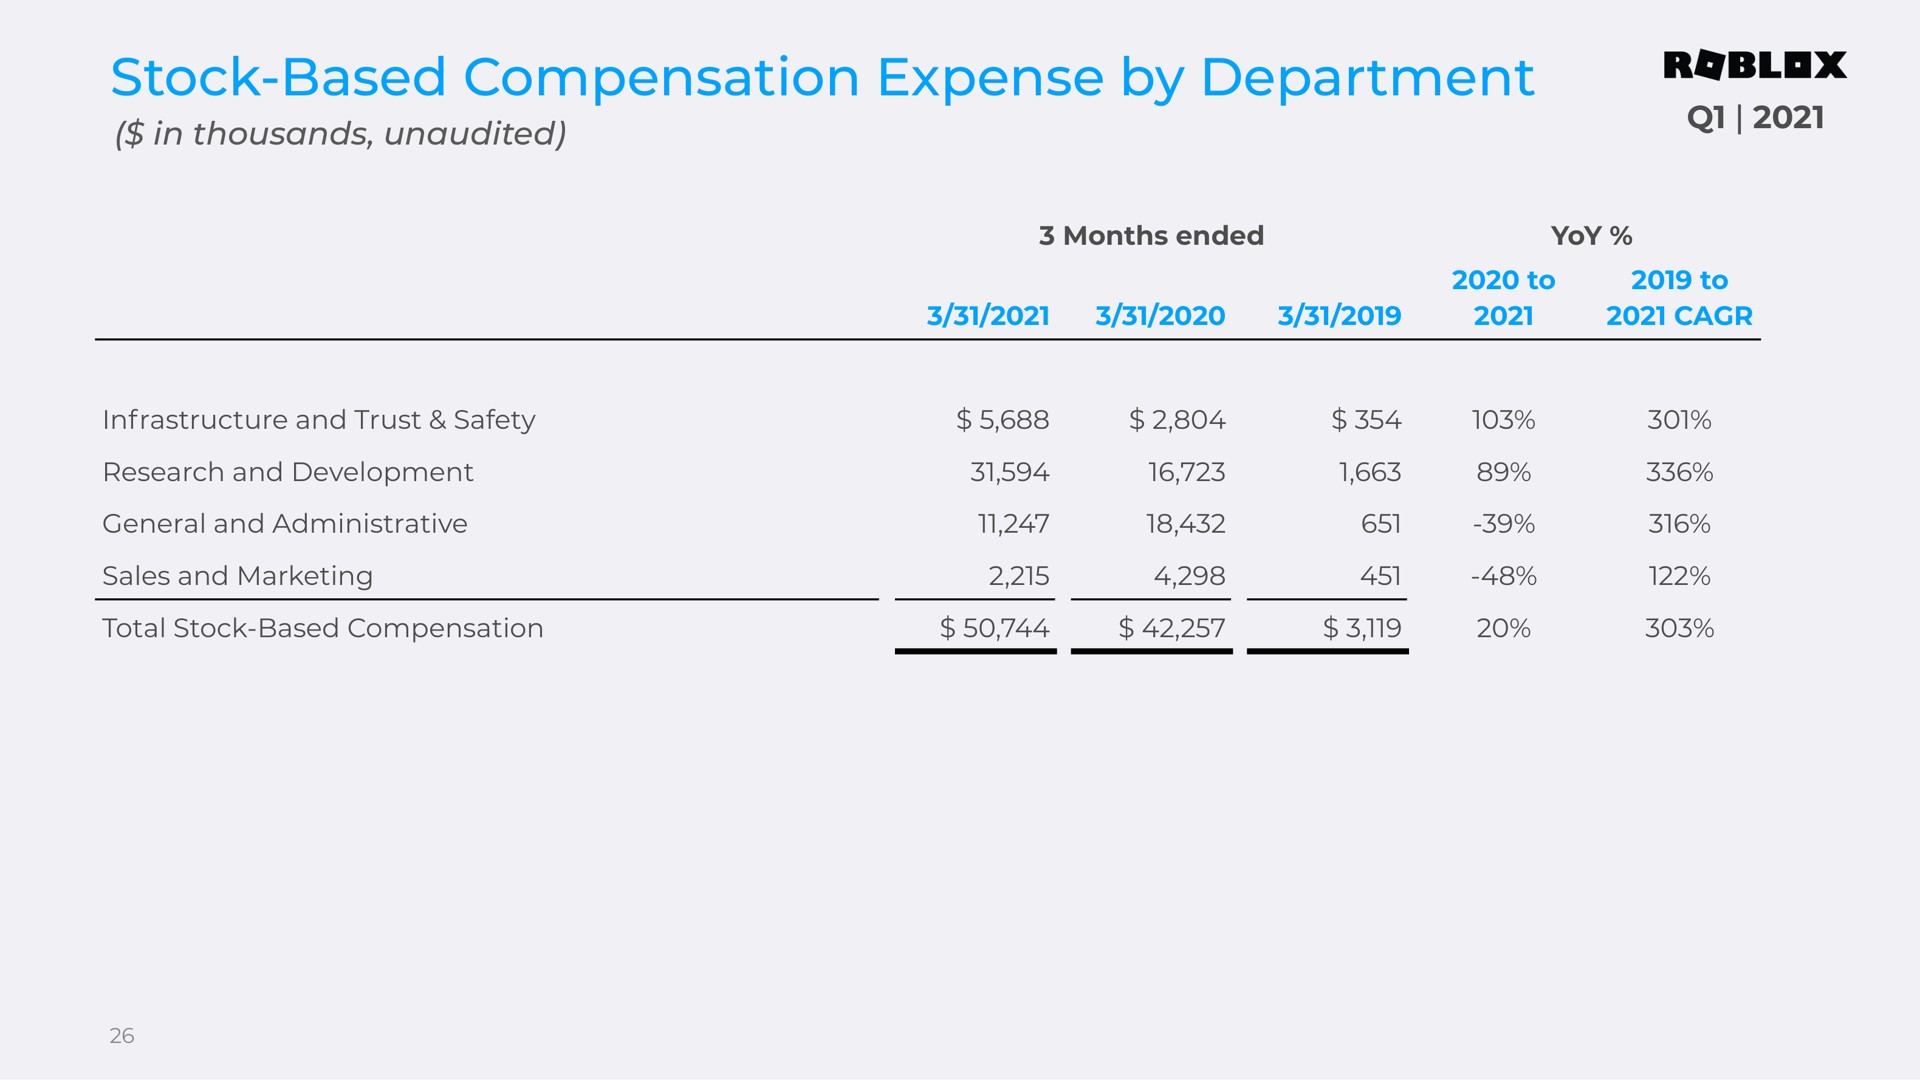 stock based compensation expense by department | Roblox